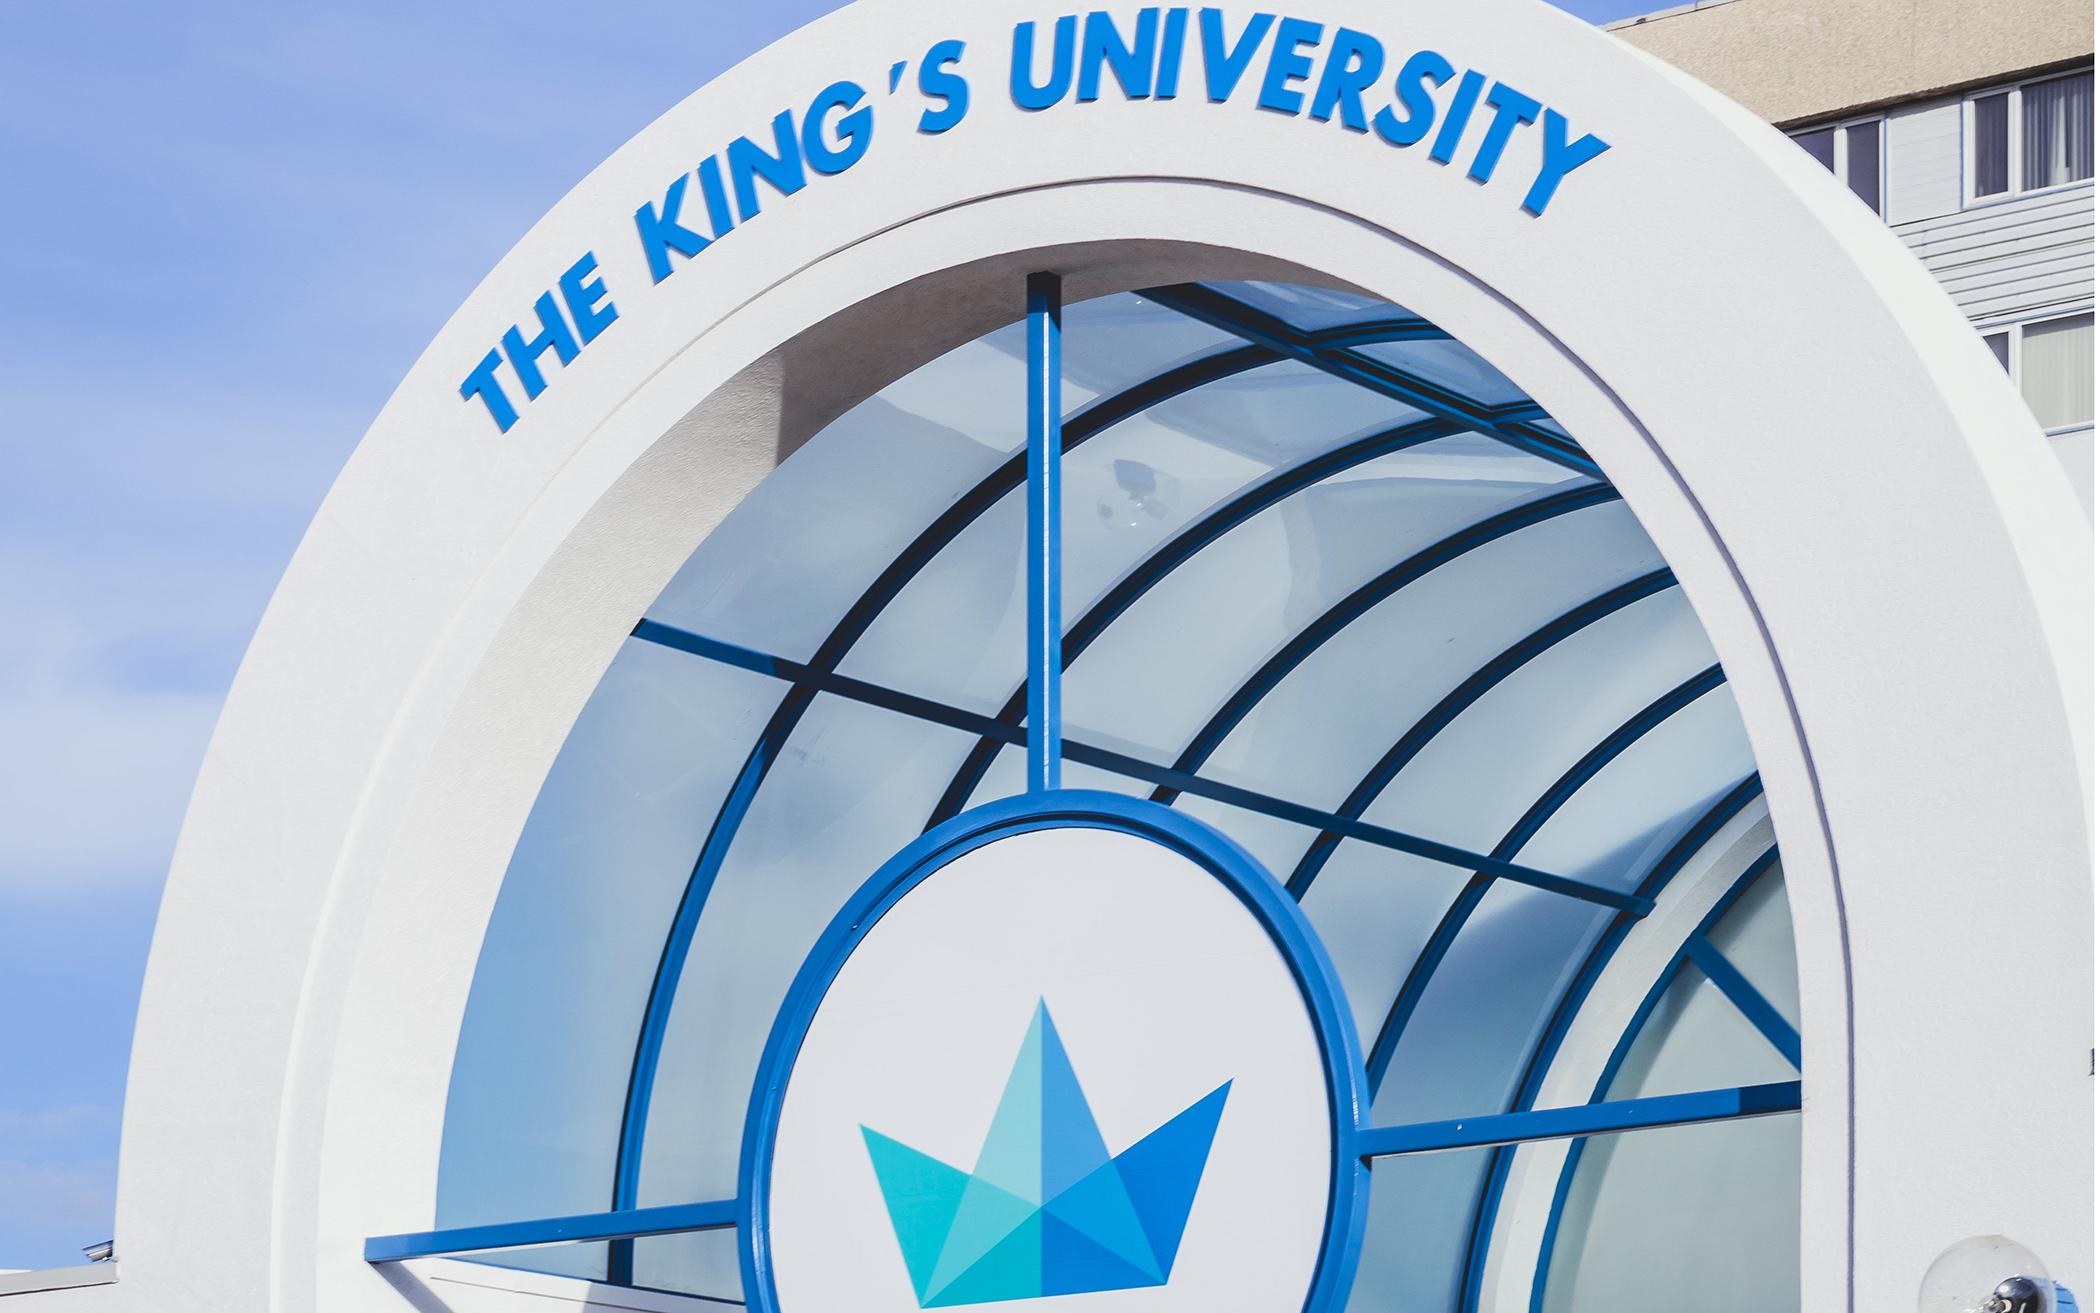 King's University Responds to Supporters Over LGBTQ Concerns